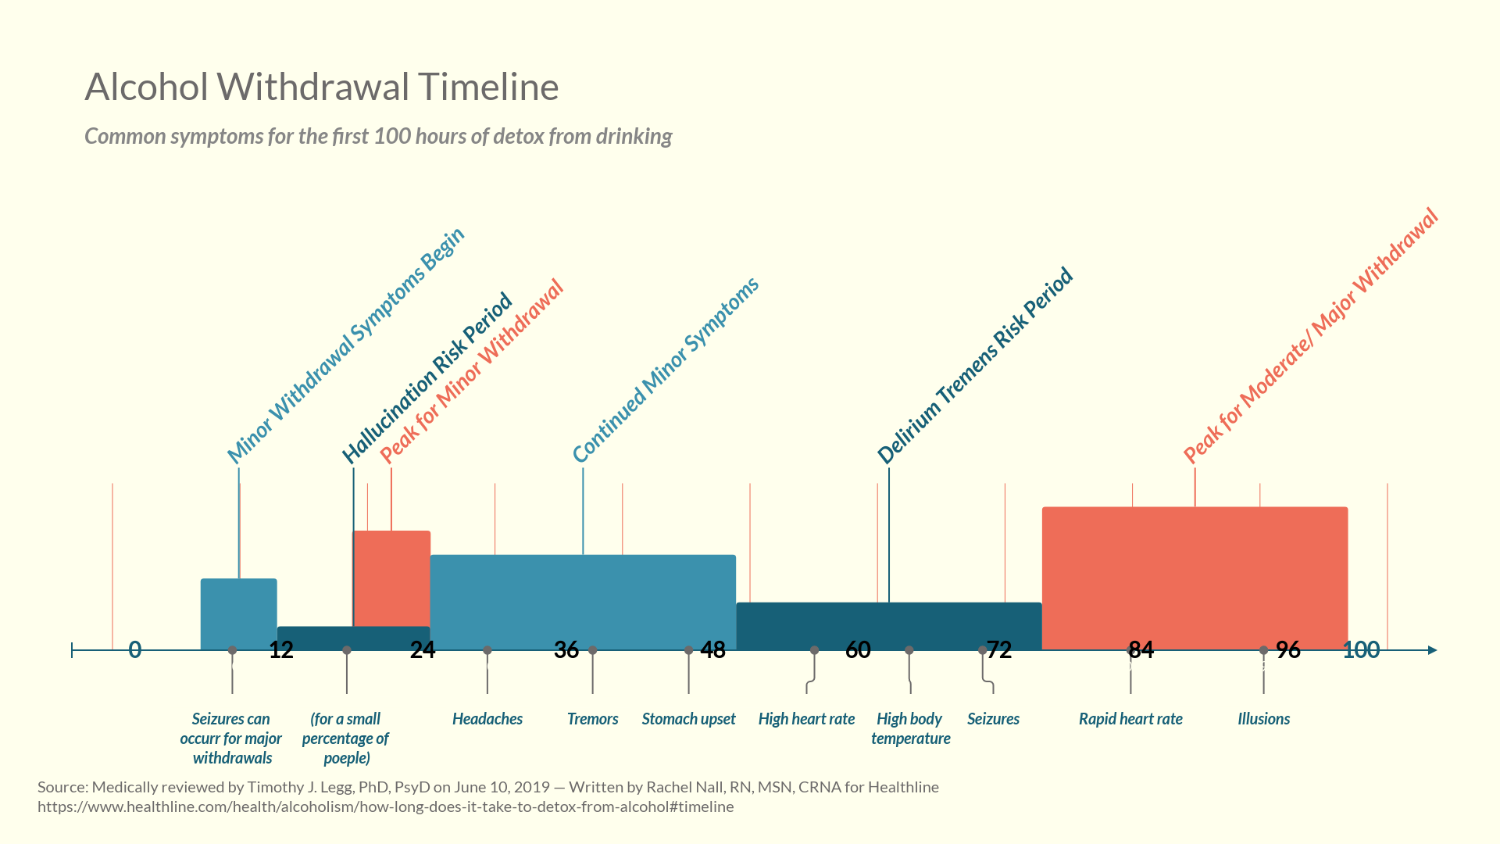 alcohol withdrawal timeline - symptoms and duration